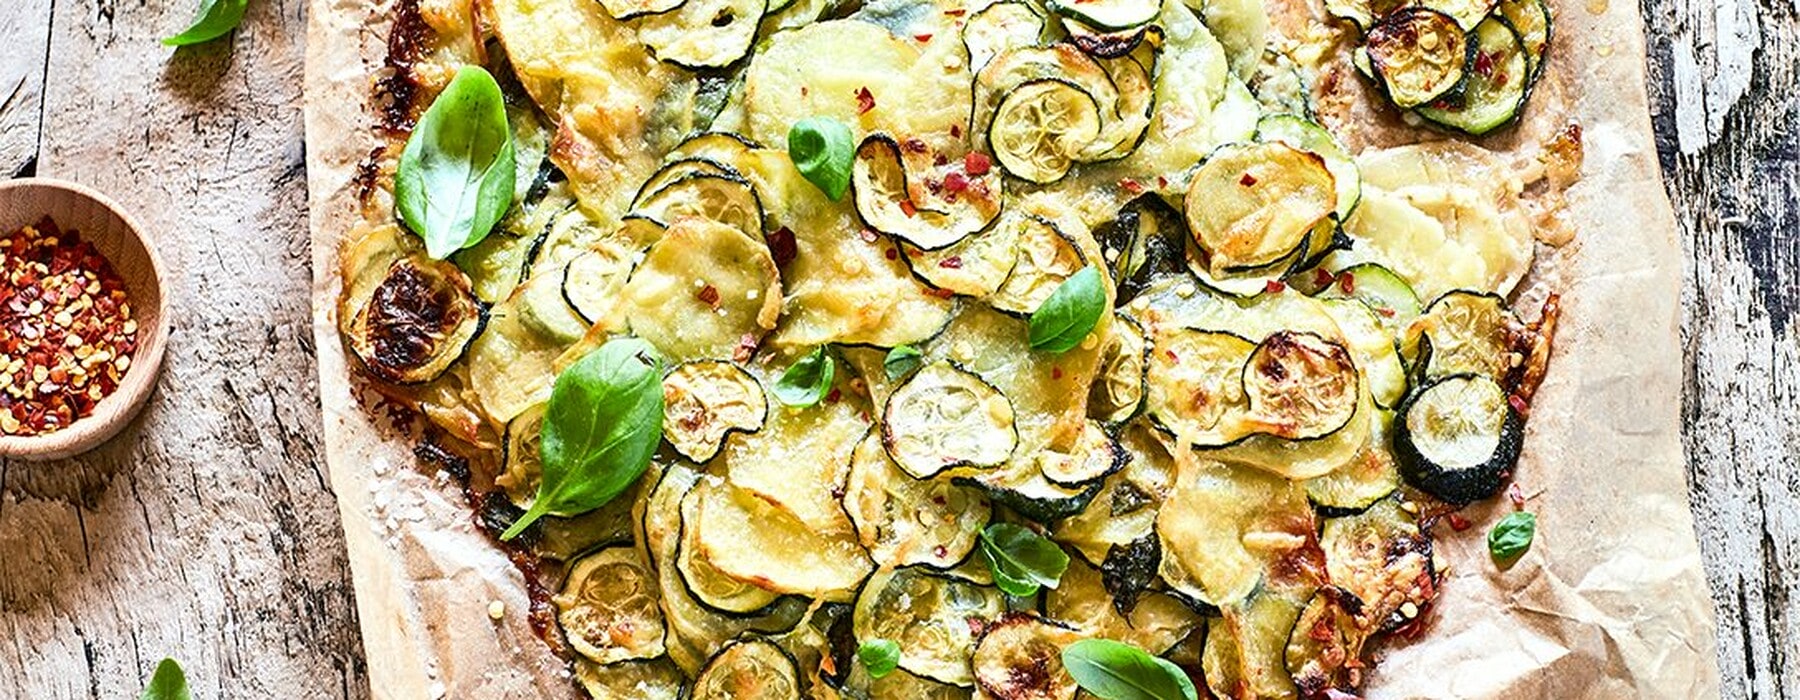 Potato and courgette pie on a wooden table